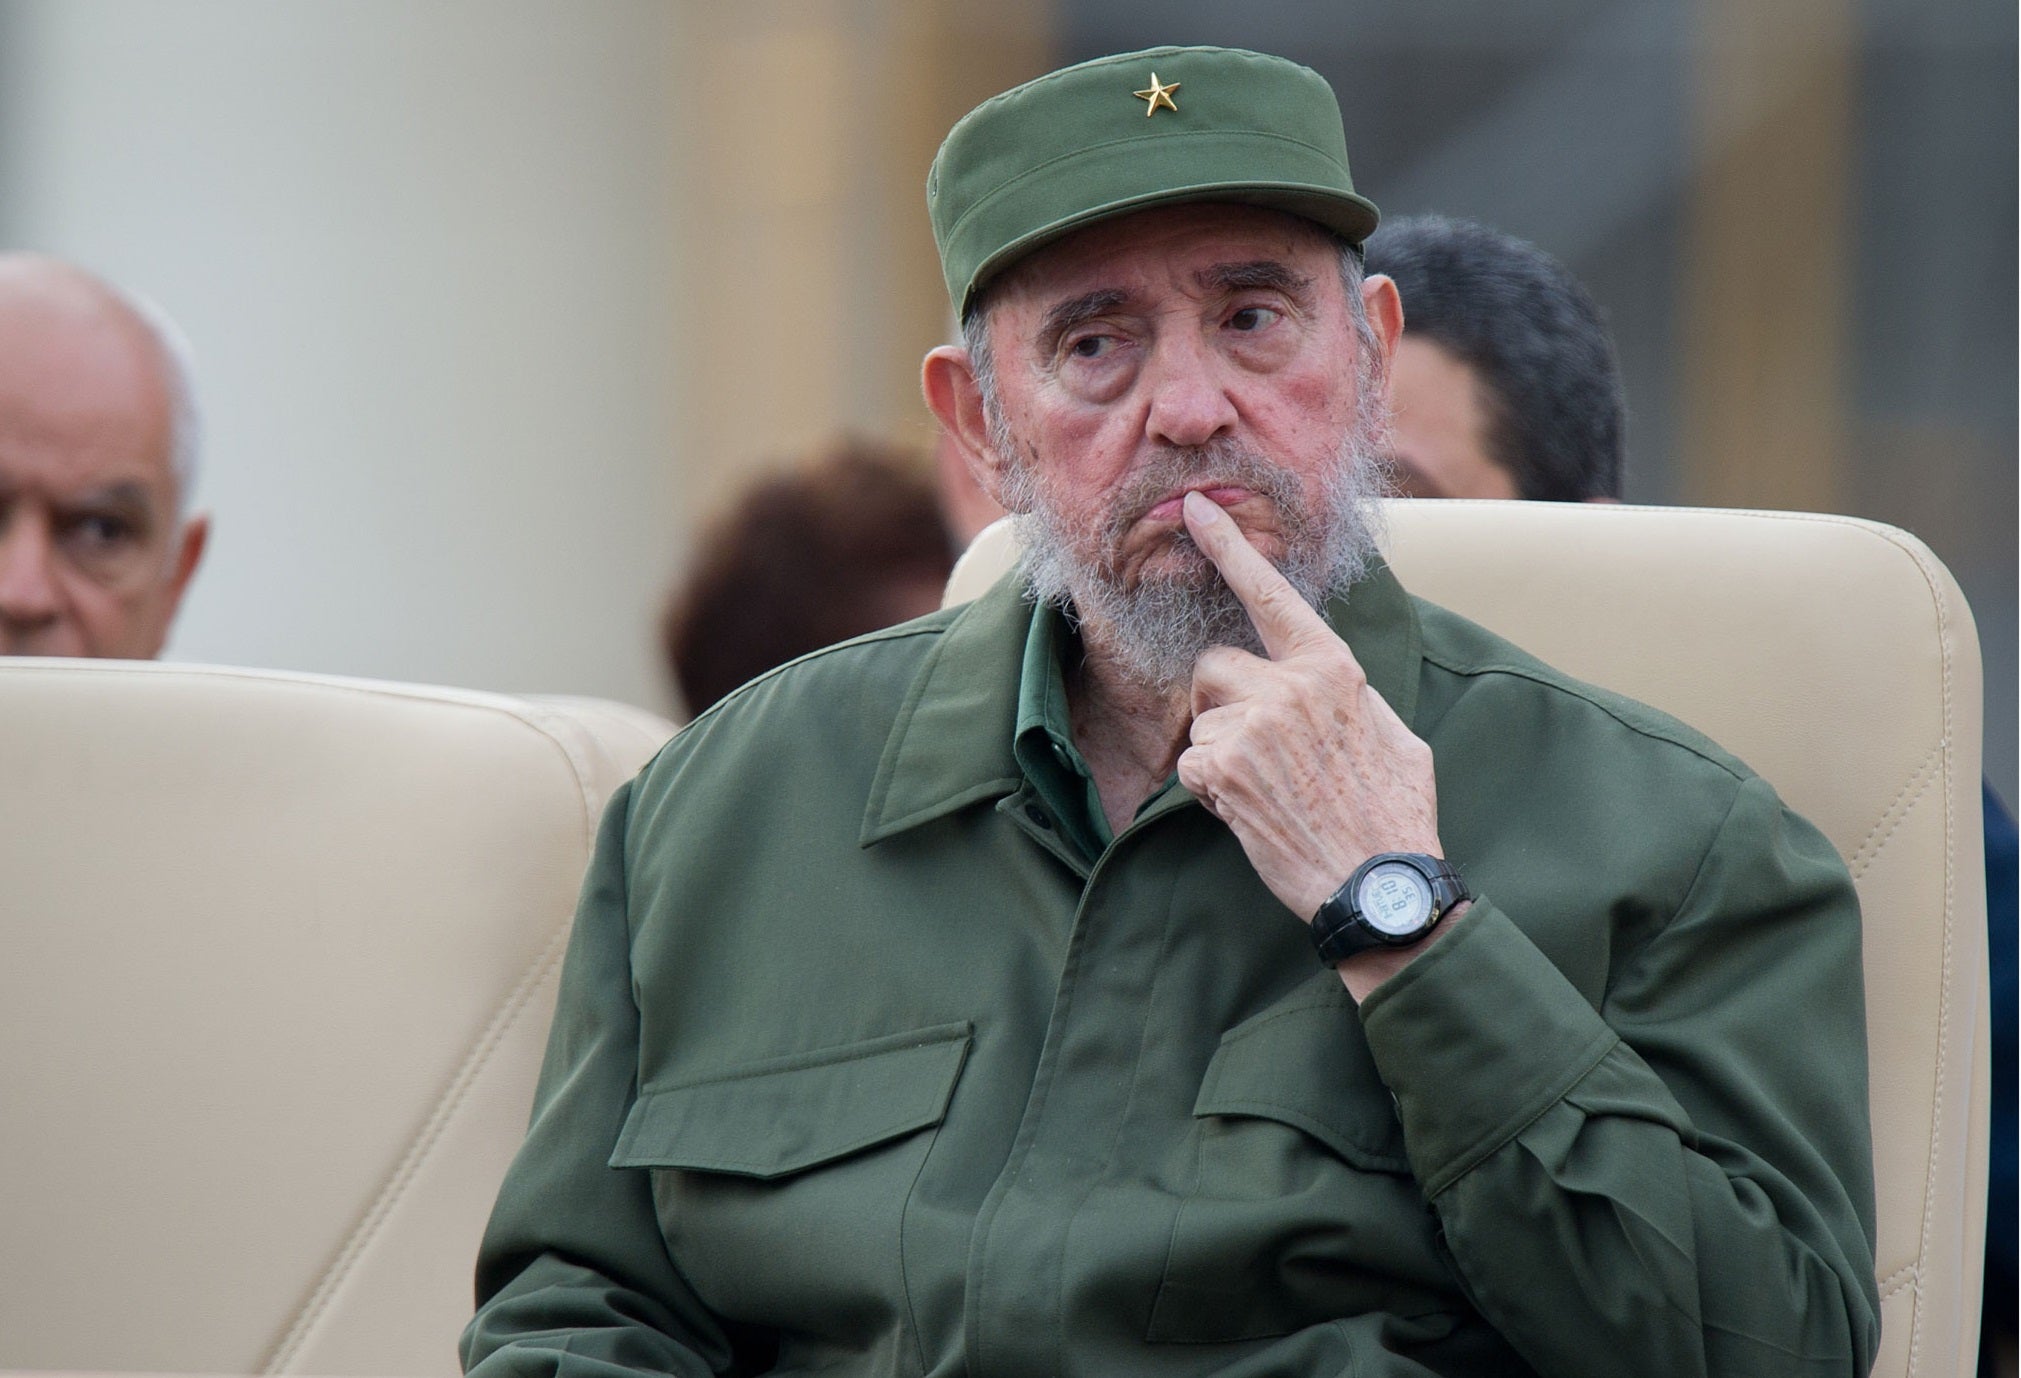 How will I keep fit if nobody's trying to assassinate me anymore? Cuba's former president Fidel Castro in 2010